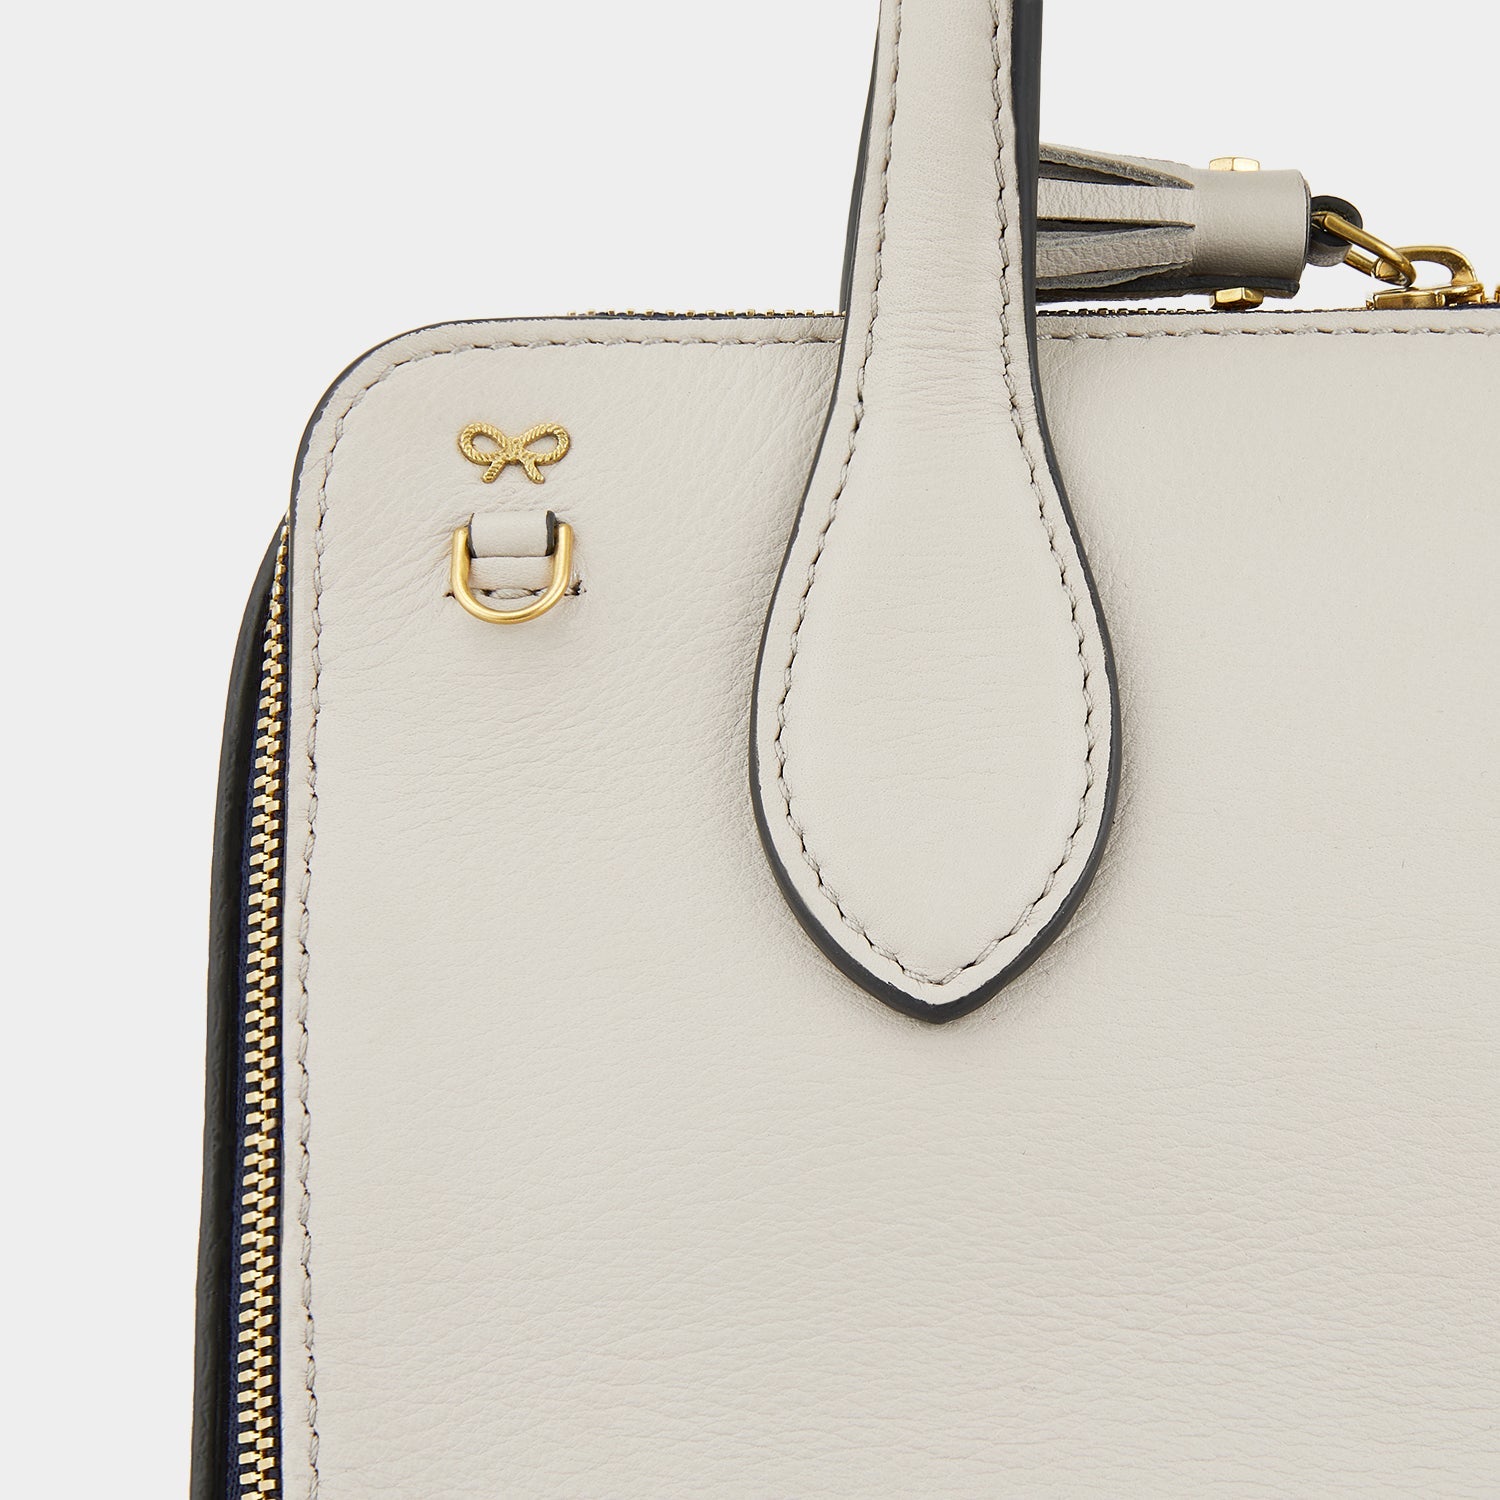 The Strathberry Midi Tote - Top Handle Leather Tote Bag - White